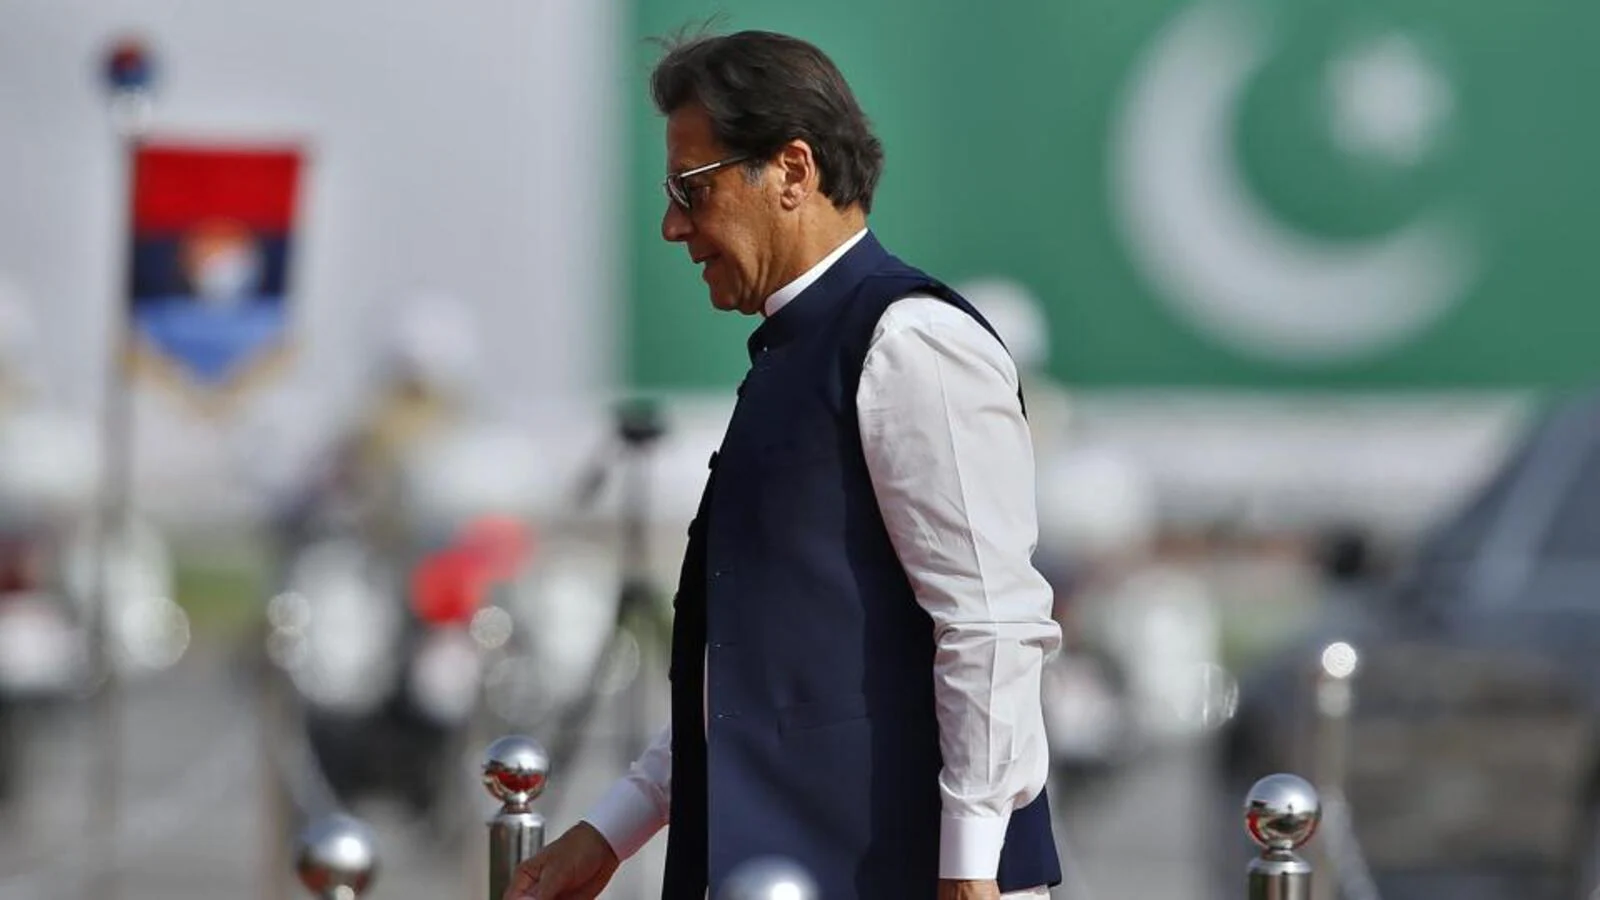 No comments, says India on Imran Khan driving Pakistan into political turmoil